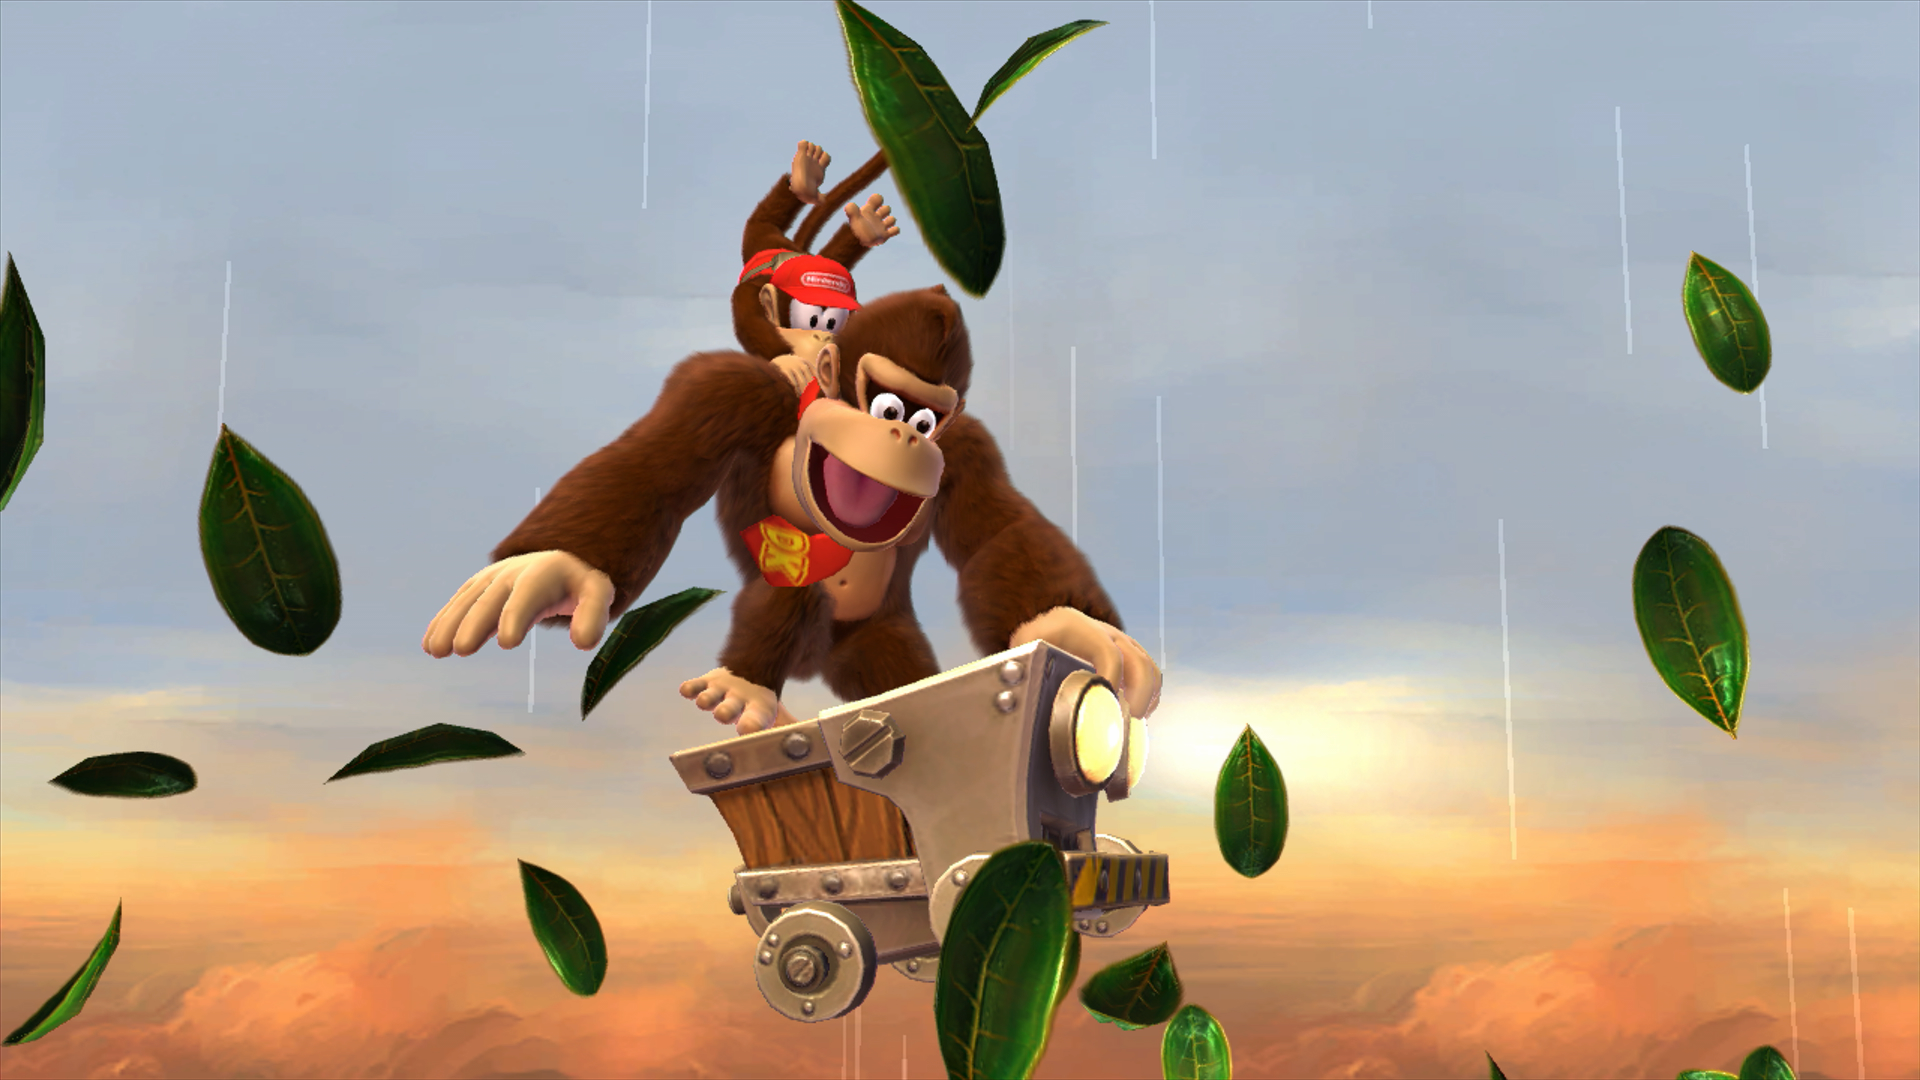 Donkey Kong Country: Tropical Freeze Review - Review - Nintendo World Report